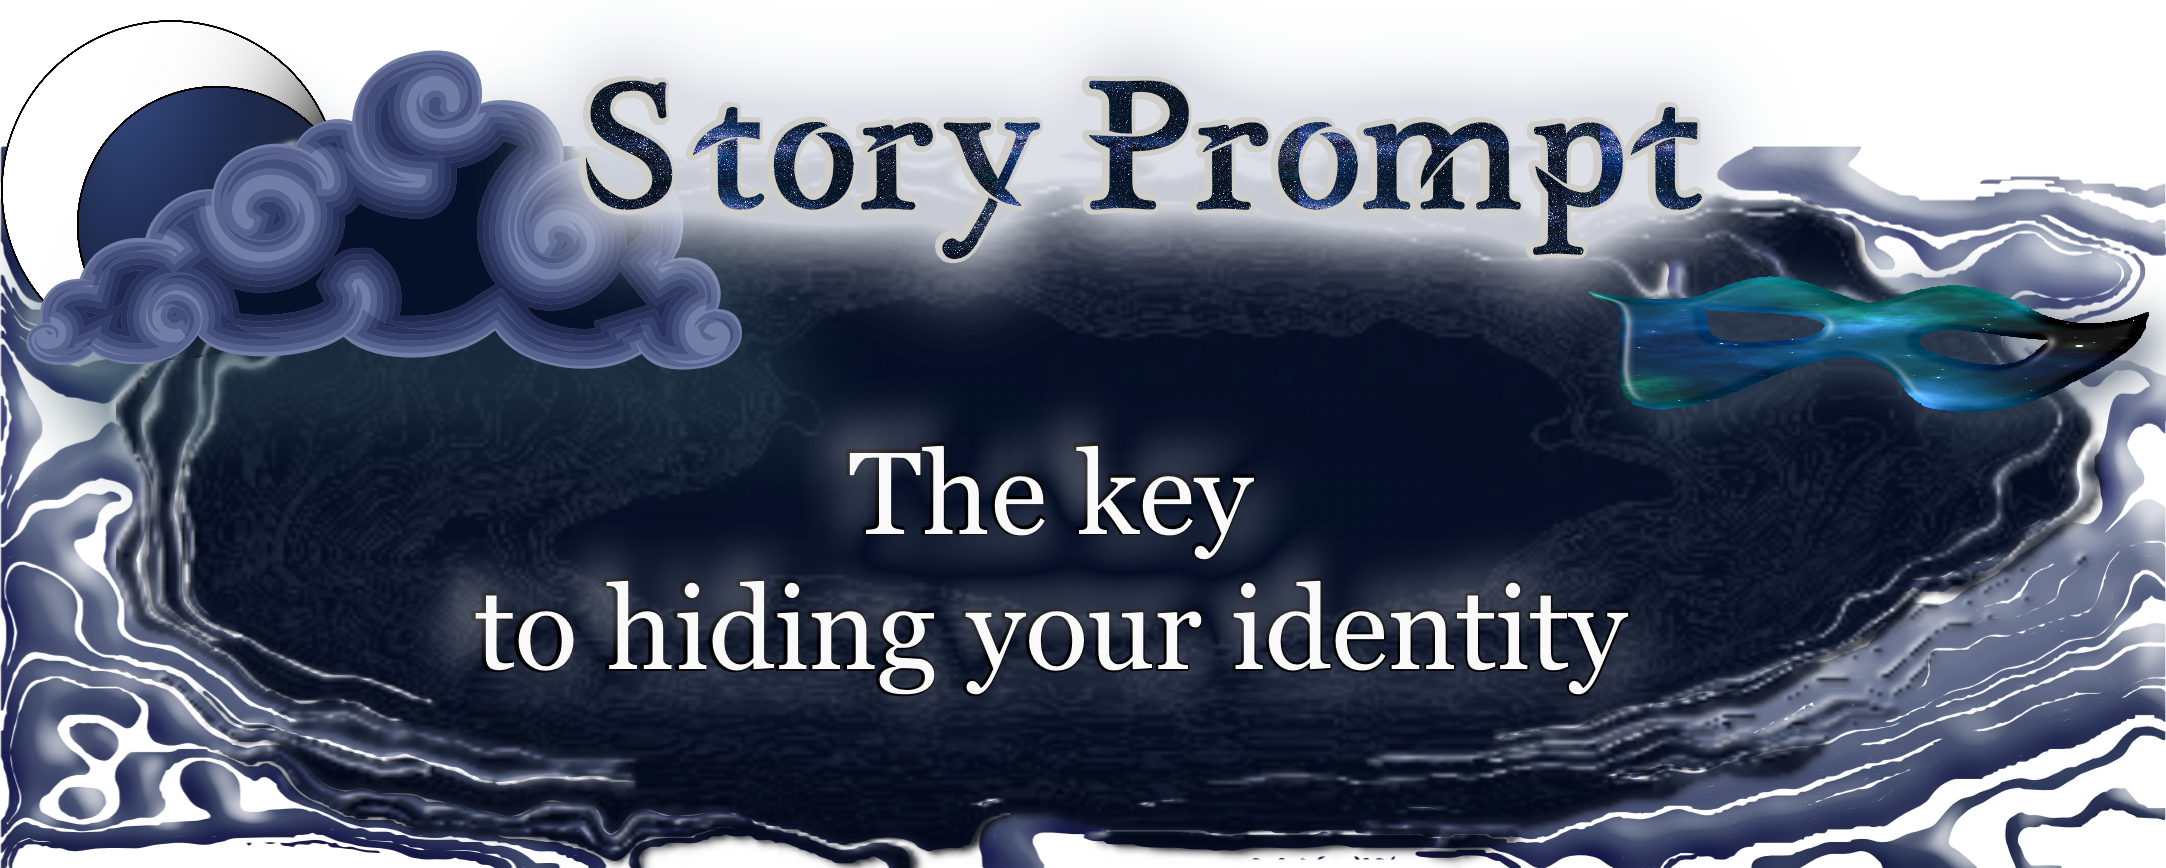 Author Jenna Eatough's Flash Fiction Story from writing prompt: The key to hiding your identity